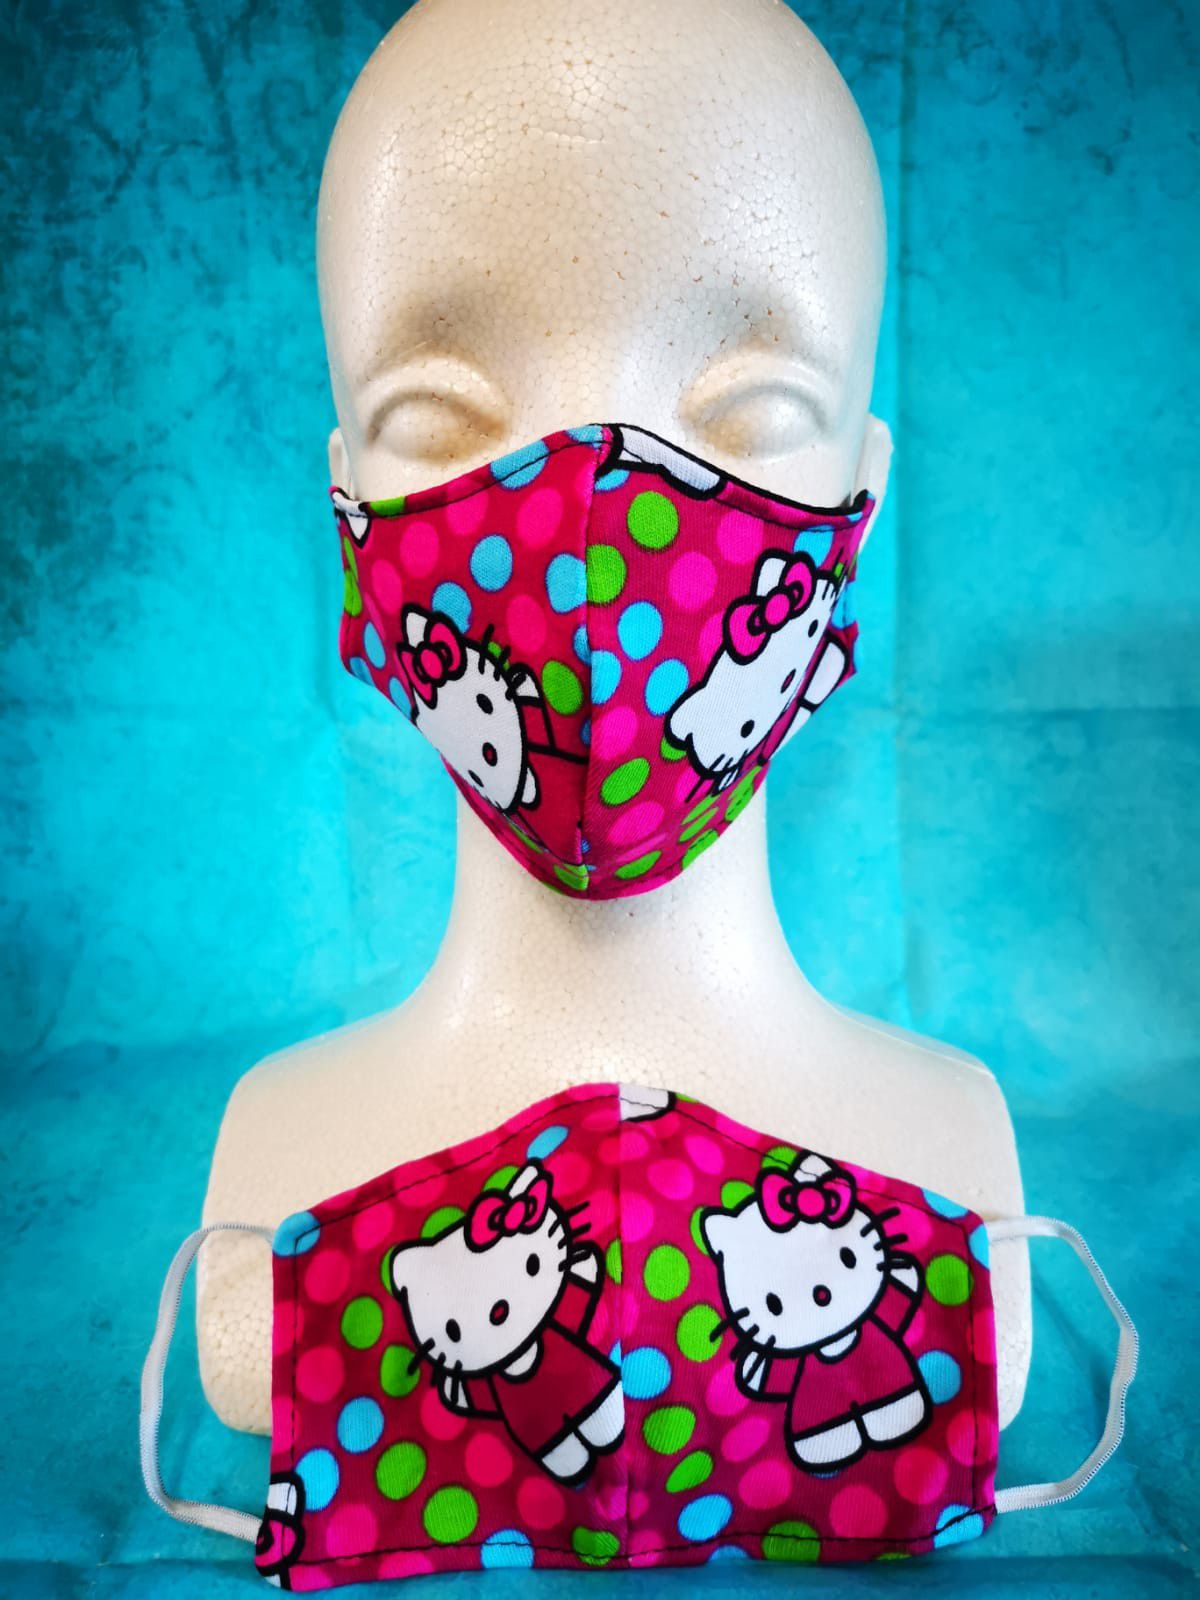 Kids Face mask (Hello Kitty various polka dots): Hand made mask, reversible, reusable, washer and dryer safe.